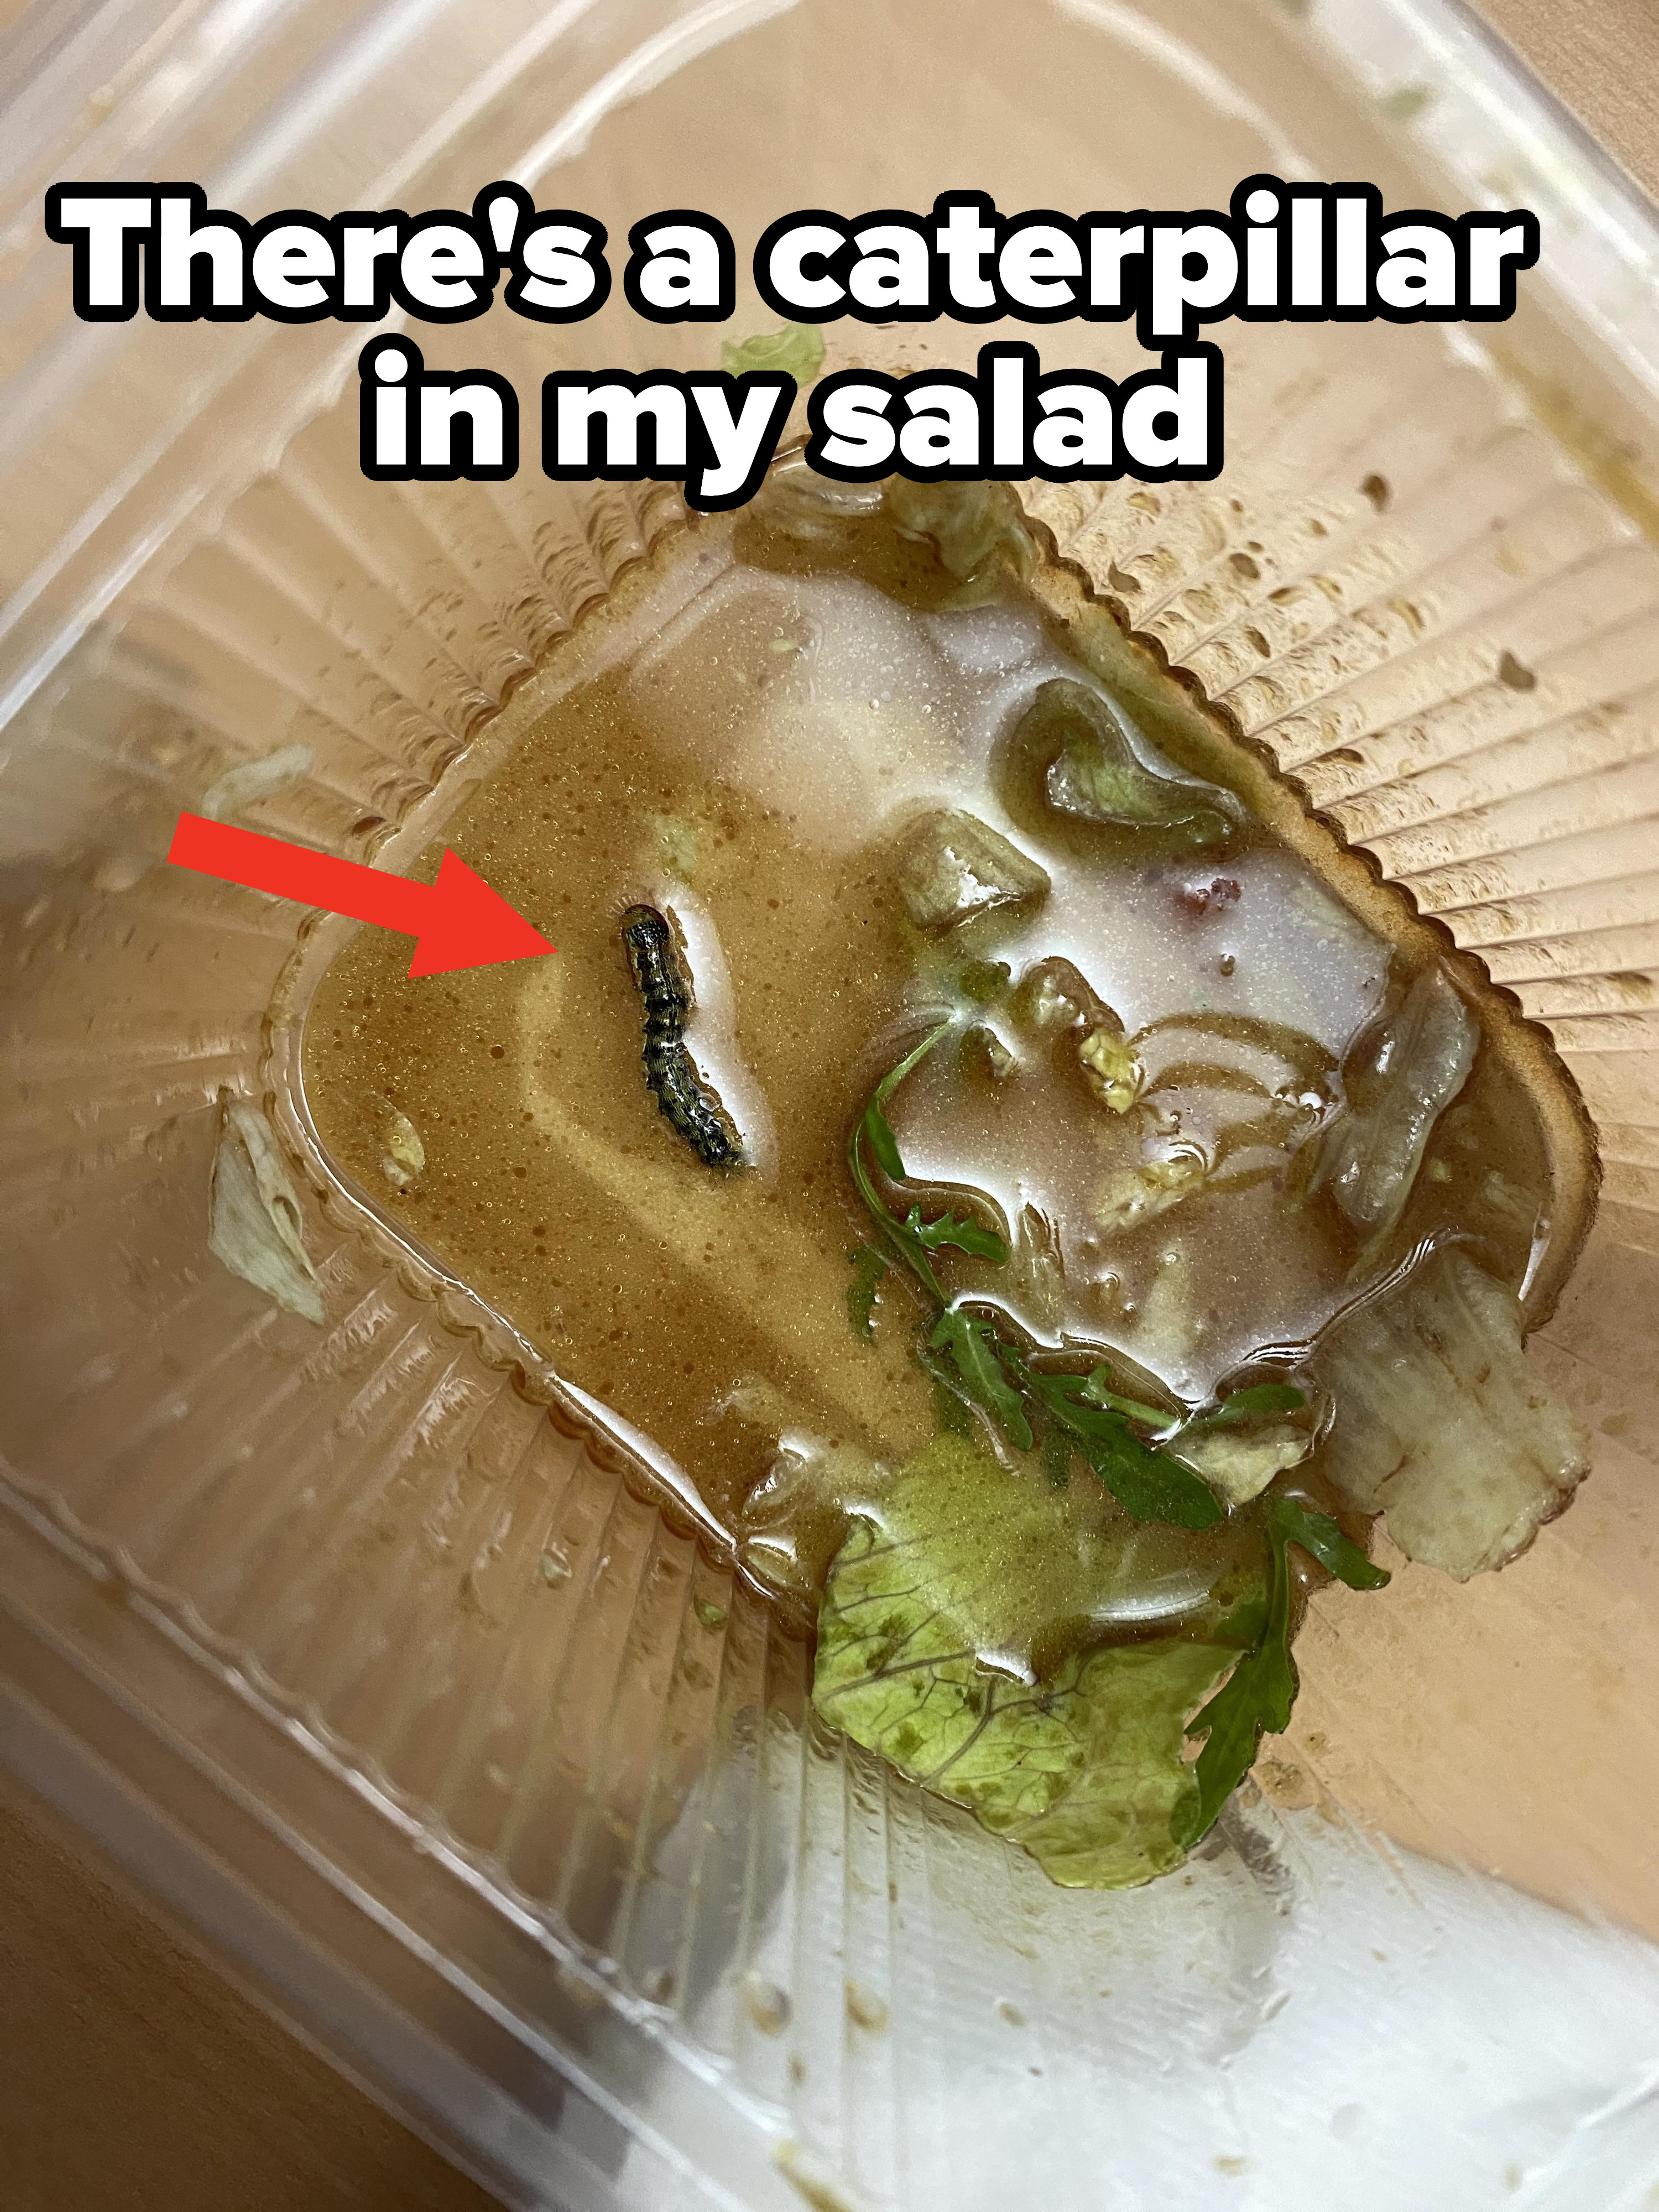 &quot;There&#x27;s a caterpillar in my salad&quot; and a box of eaten salad with a caterpillar at the bottom